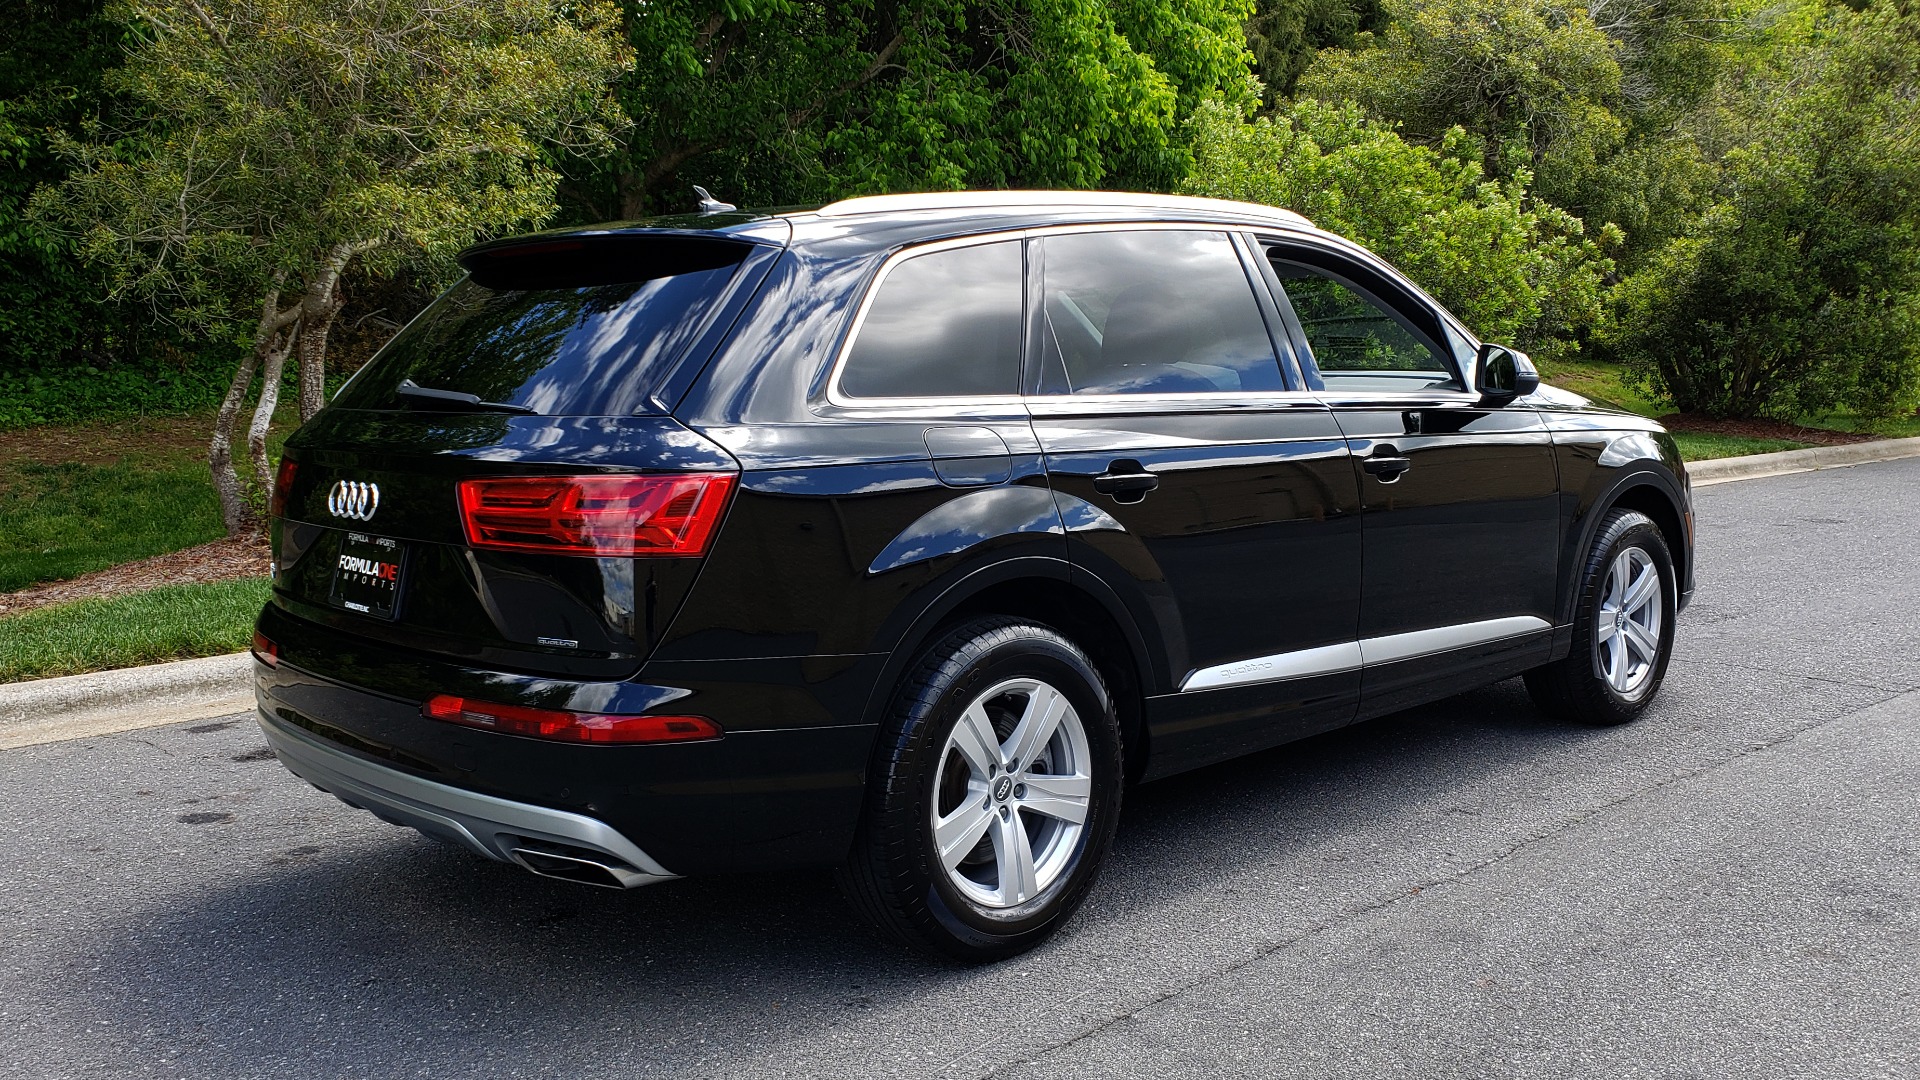 Used 2017 Audi Q7 PREMIUM PLUS / VISION PKG / NAV / PANO-ROOF / 3-ROW / REARVIEW for sale Sold at Formula Imports in Charlotte NC 28227 6